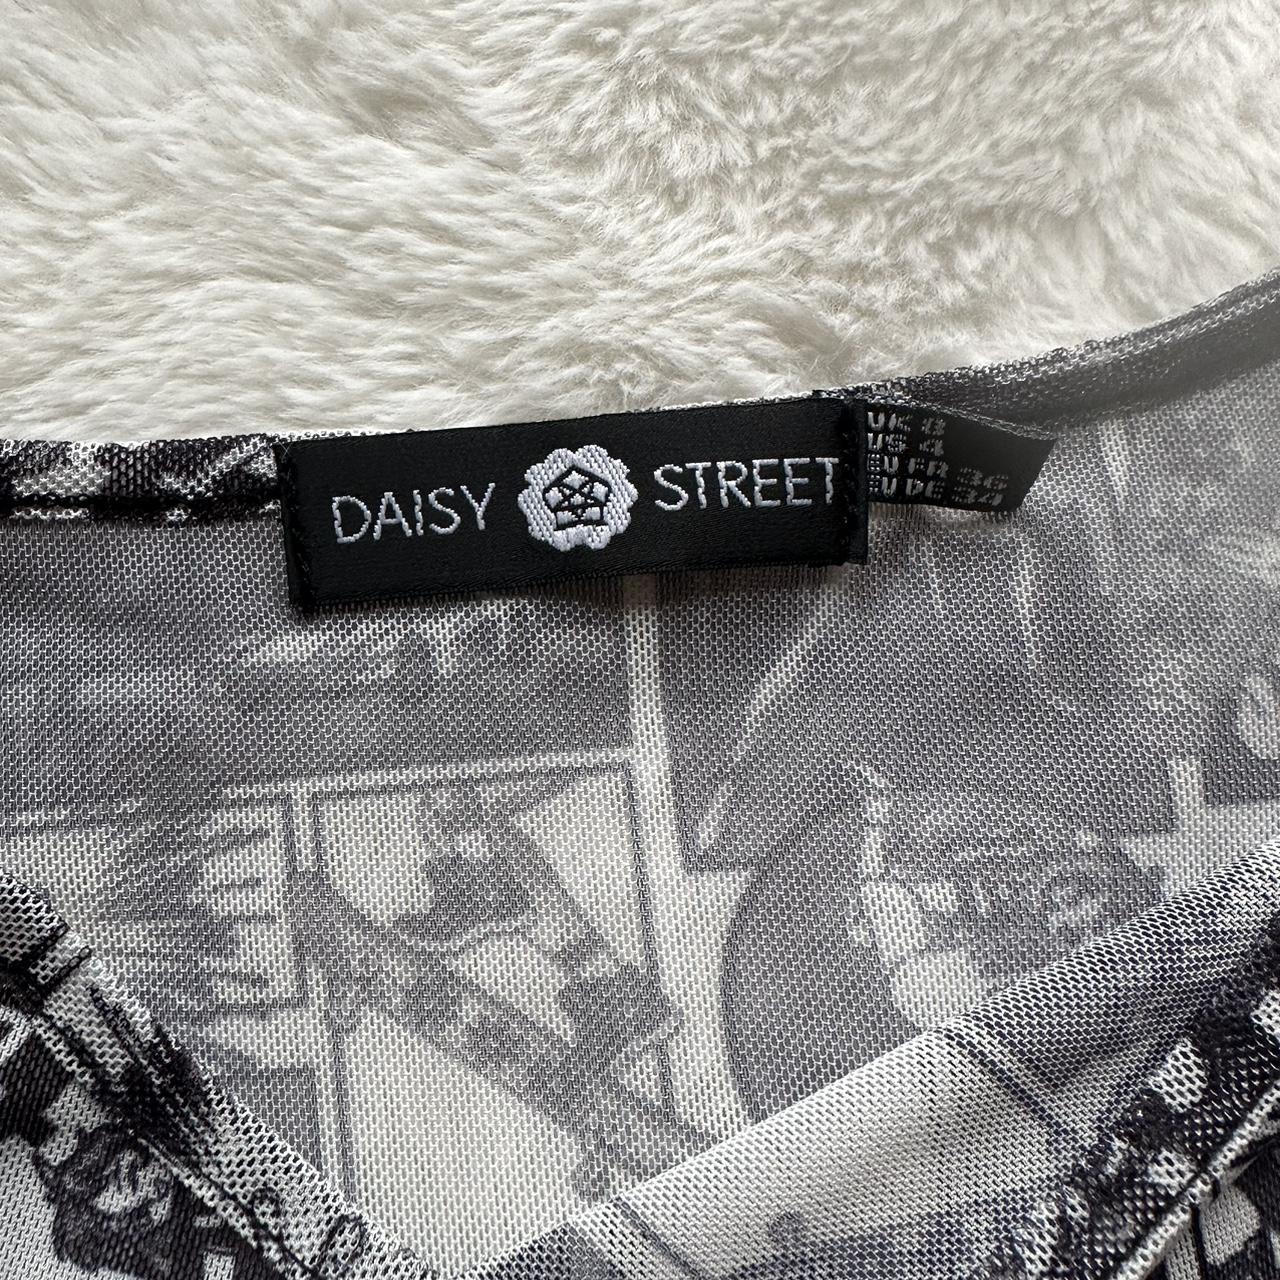 Daisy Street Women's Black and White Crop-top (3)